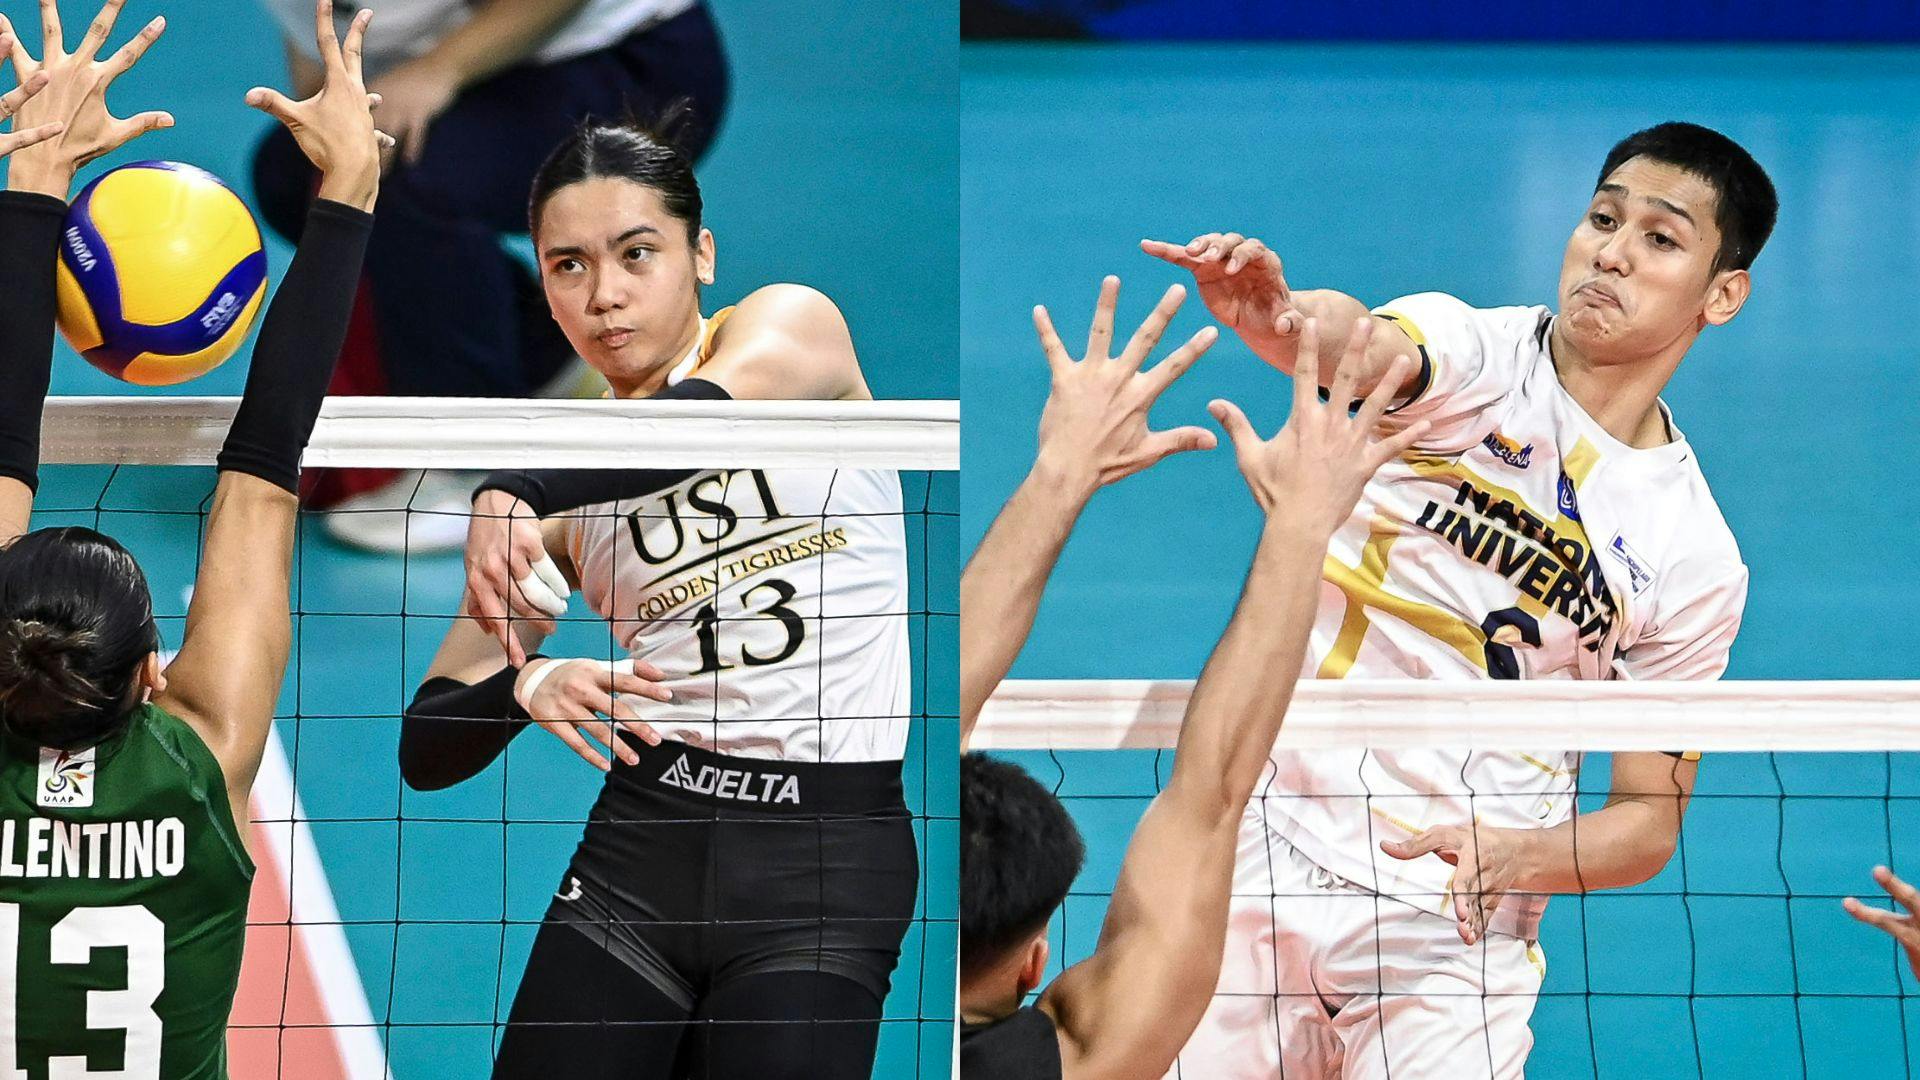 UAAP: UST’s Perdido, NU’s Buddin named UAAP Players of the Week as elimination round concludes